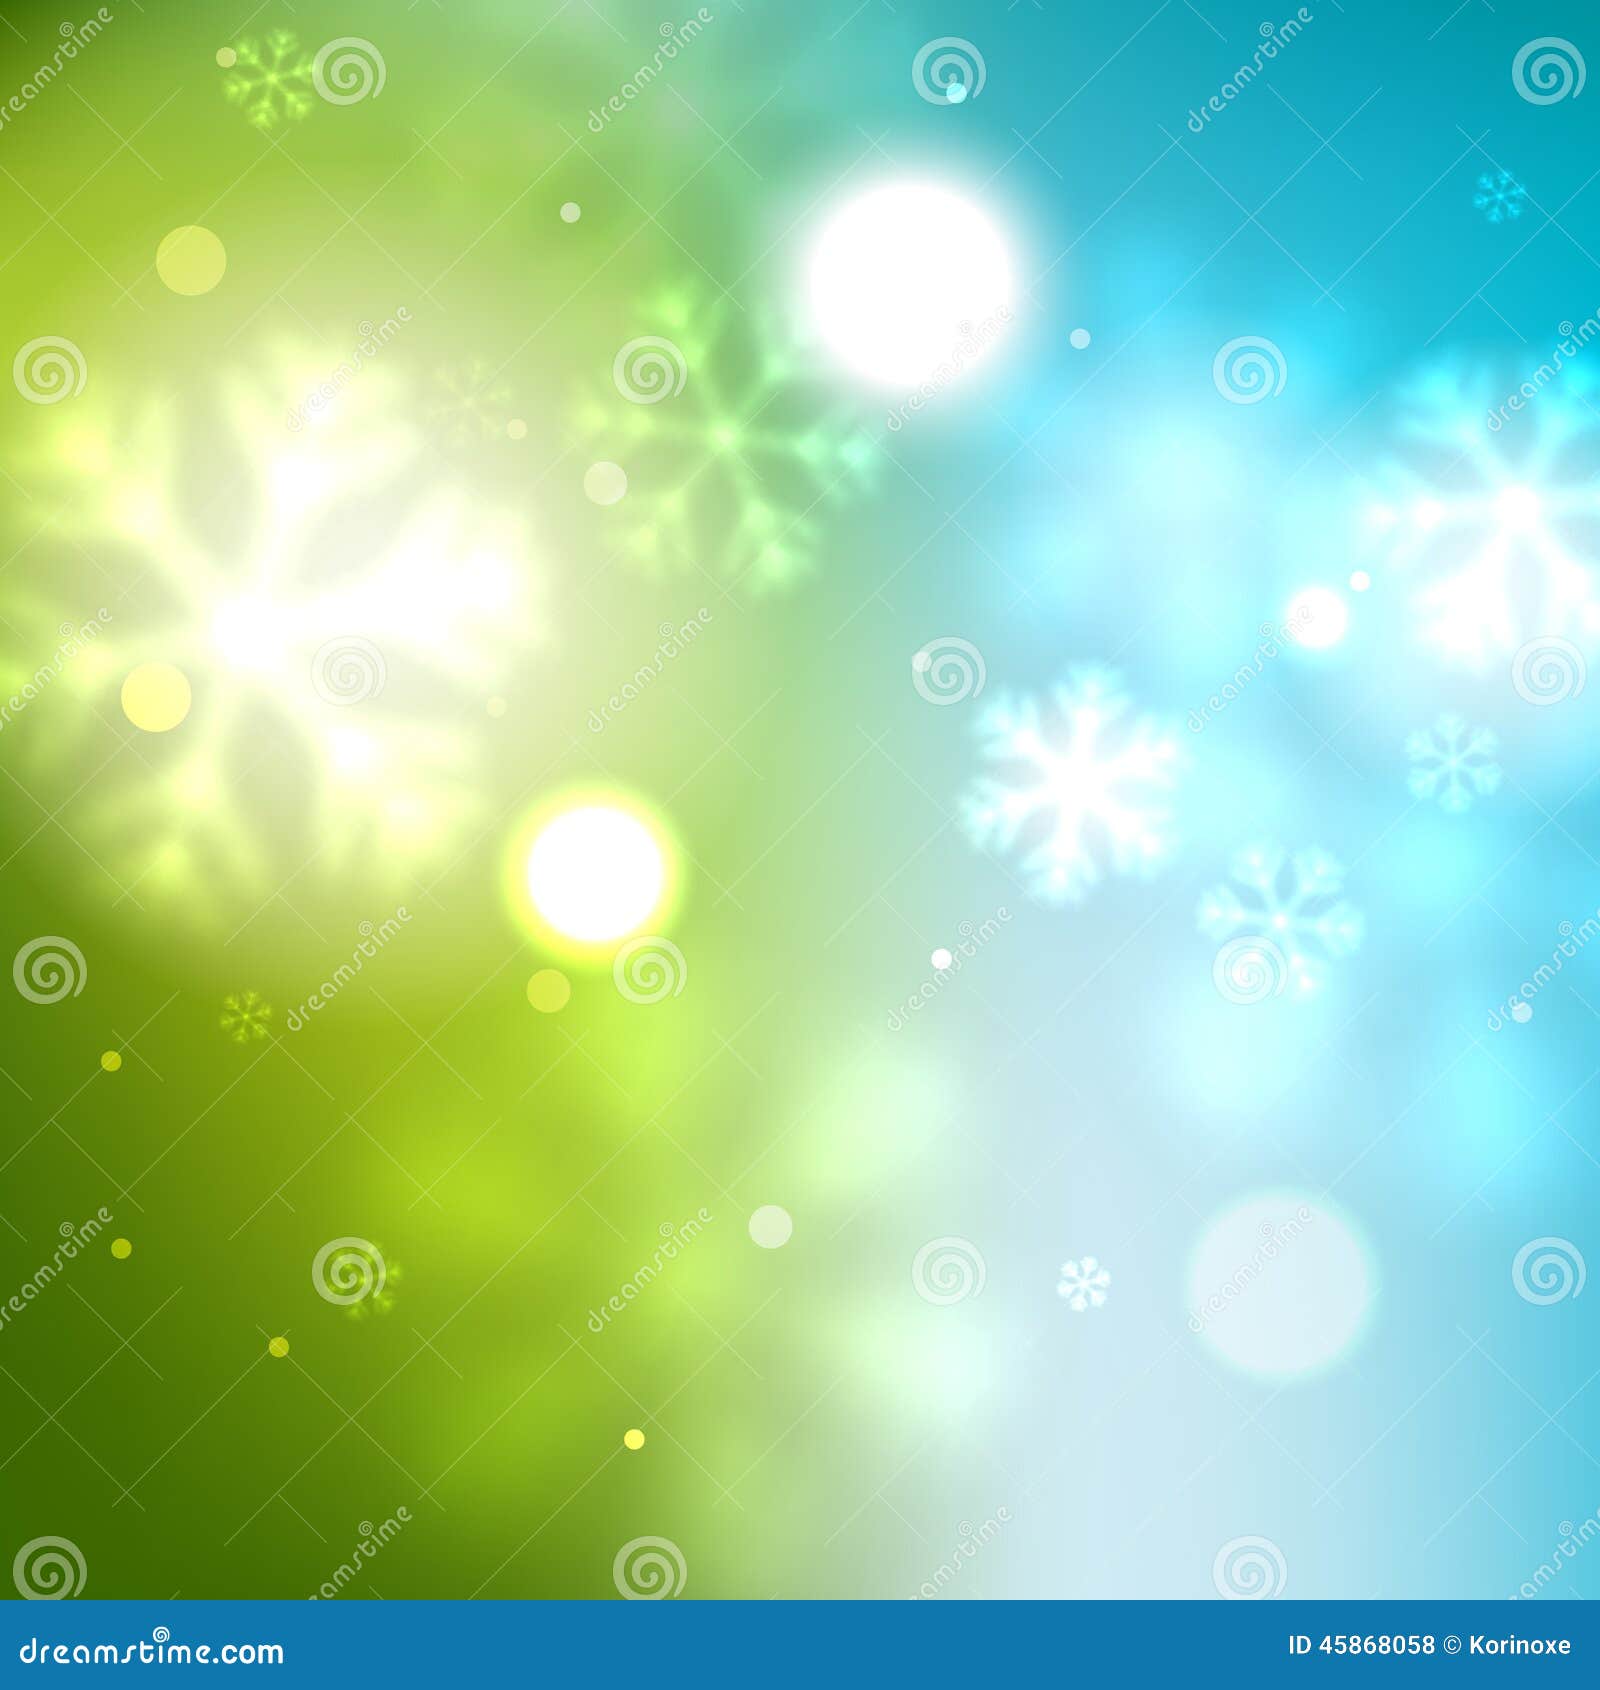 New Year Green Blurred Background Stock Vector - Illustration of blur,  december: 45868058